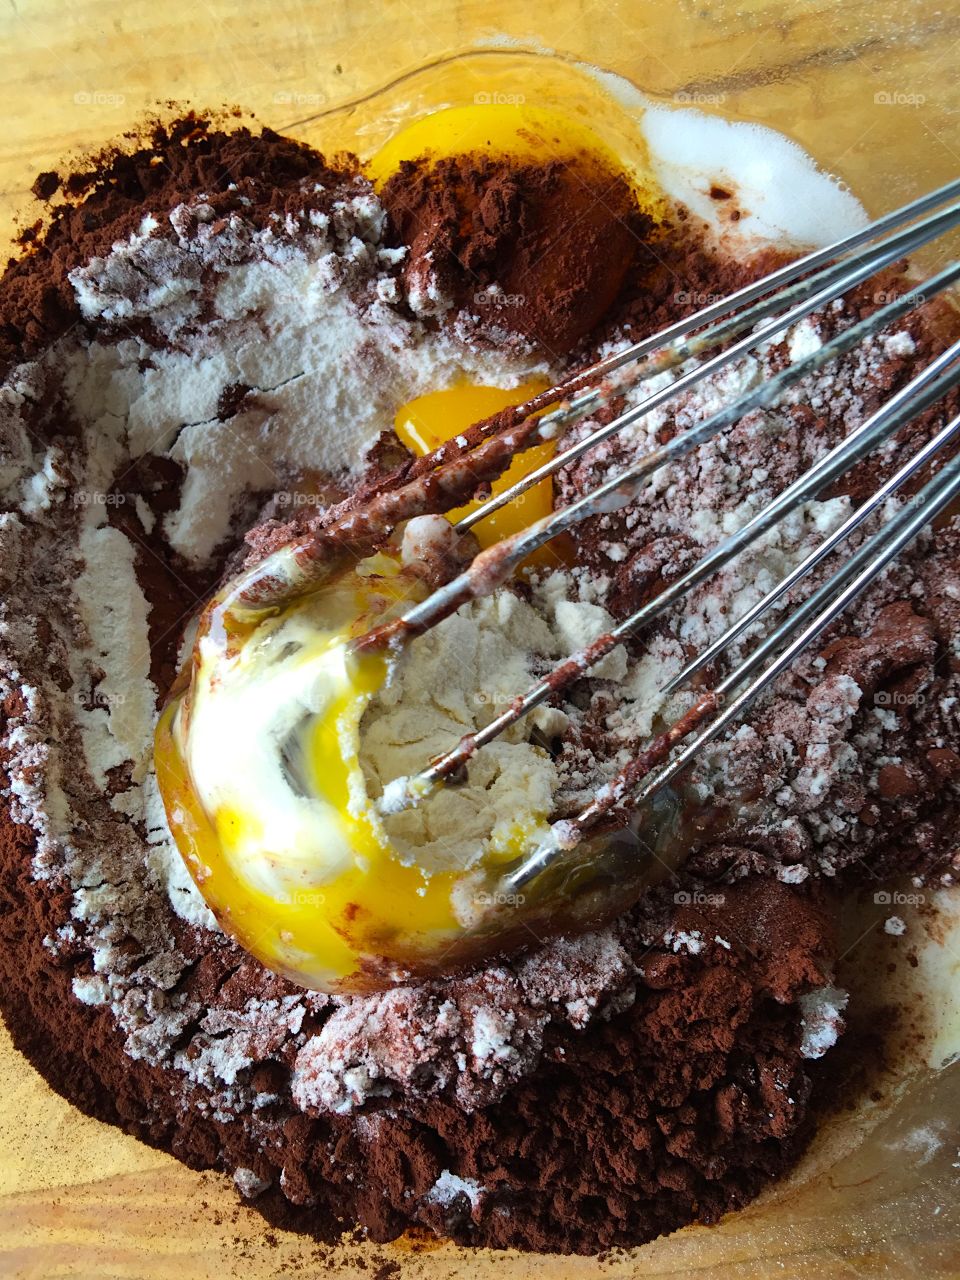 Whisking eggs into chocolate batter